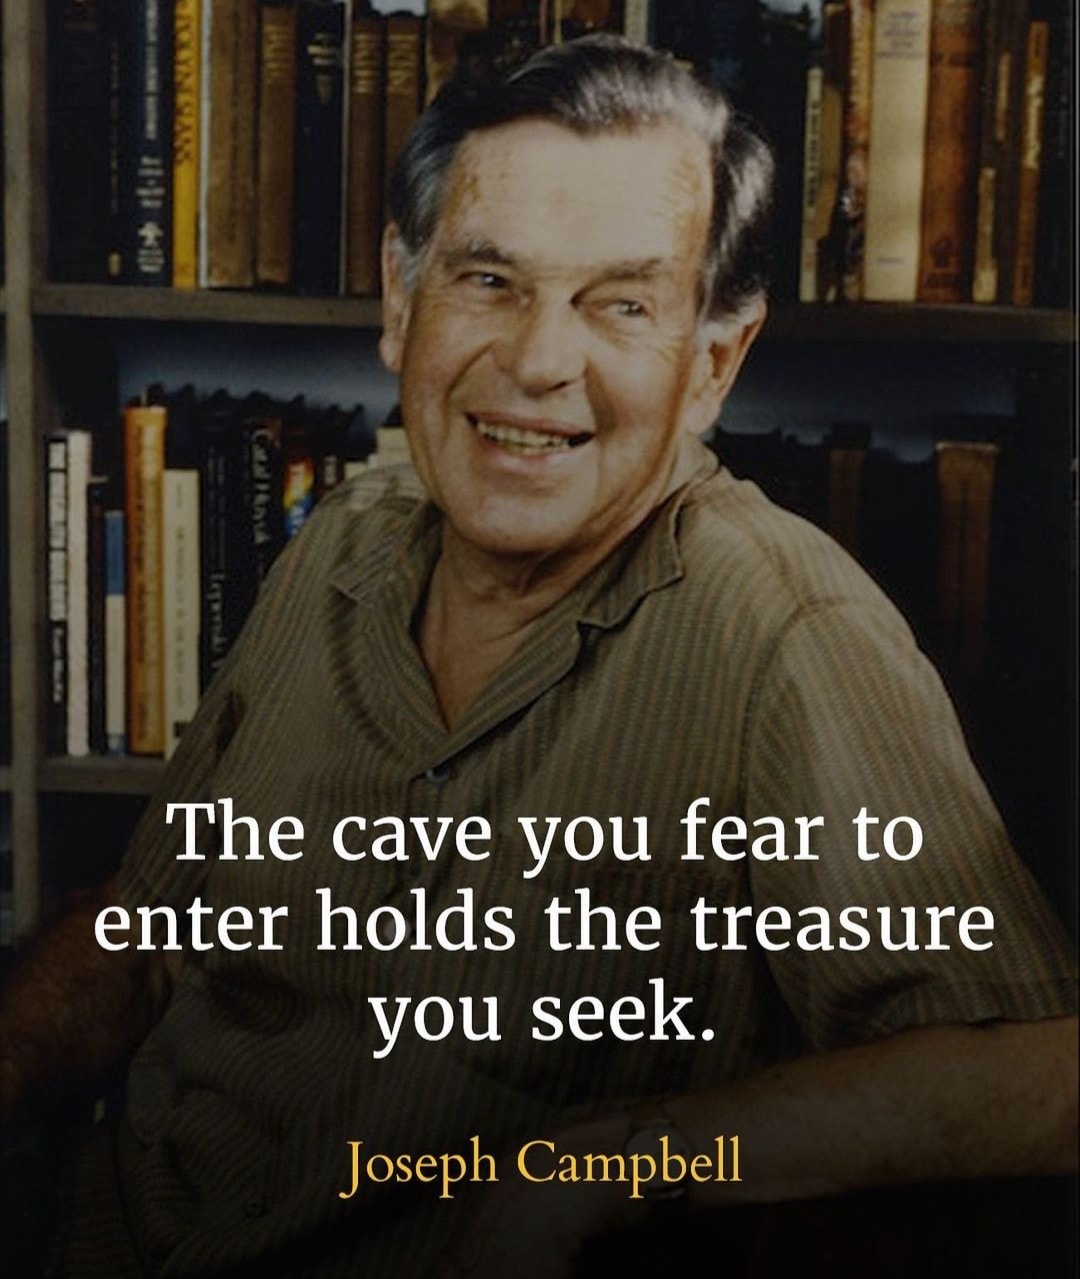 Joseph Campbell – The cave you fear to enter holds the treasure you seek.